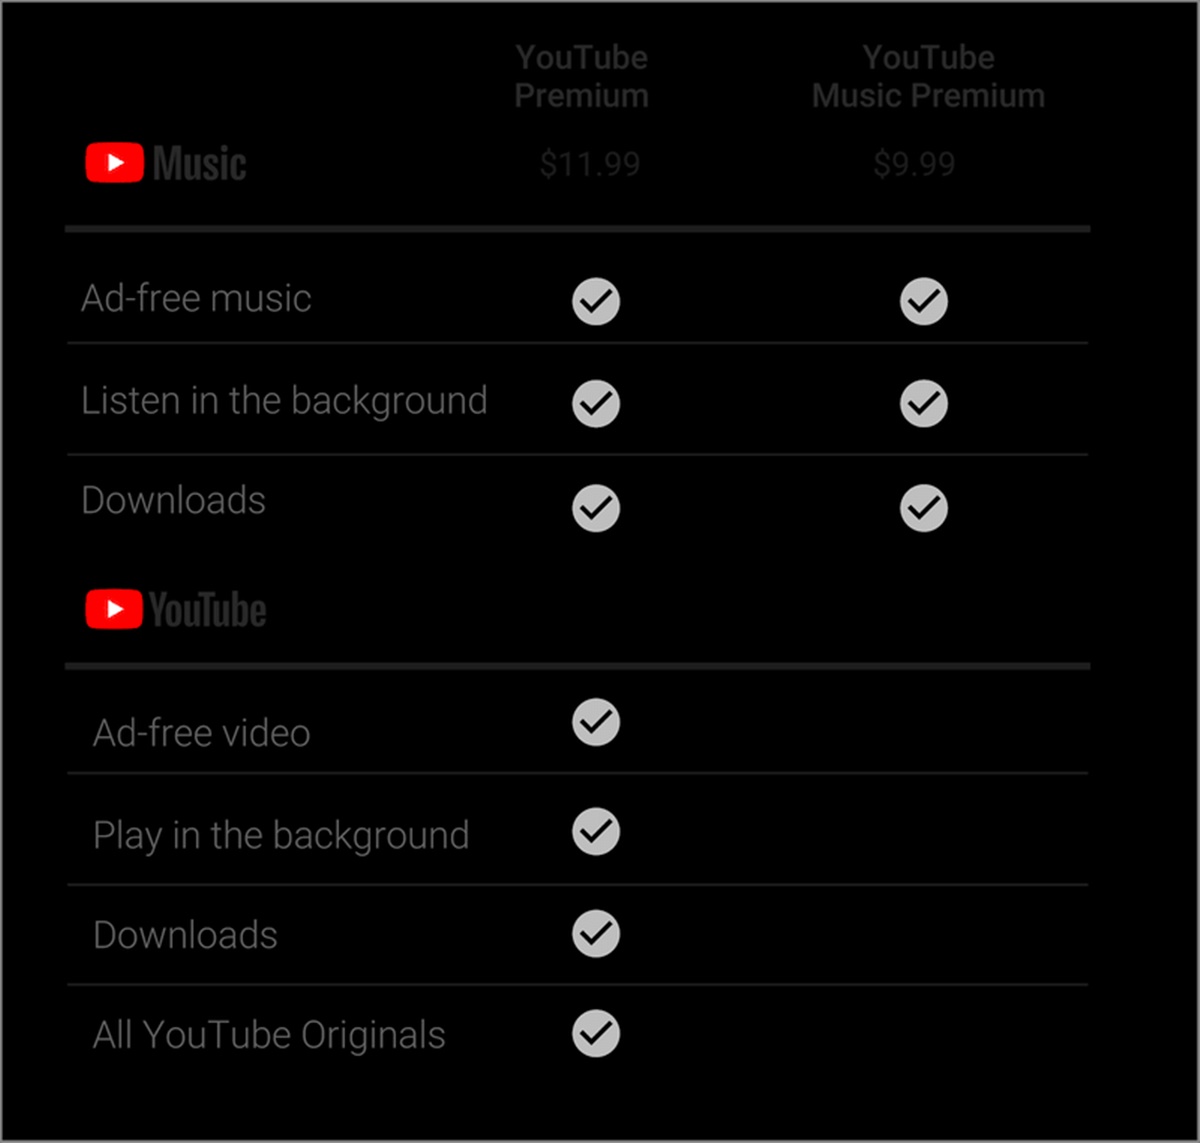 youtube-premium-vs-youtube-music-premium-whats-the-difference